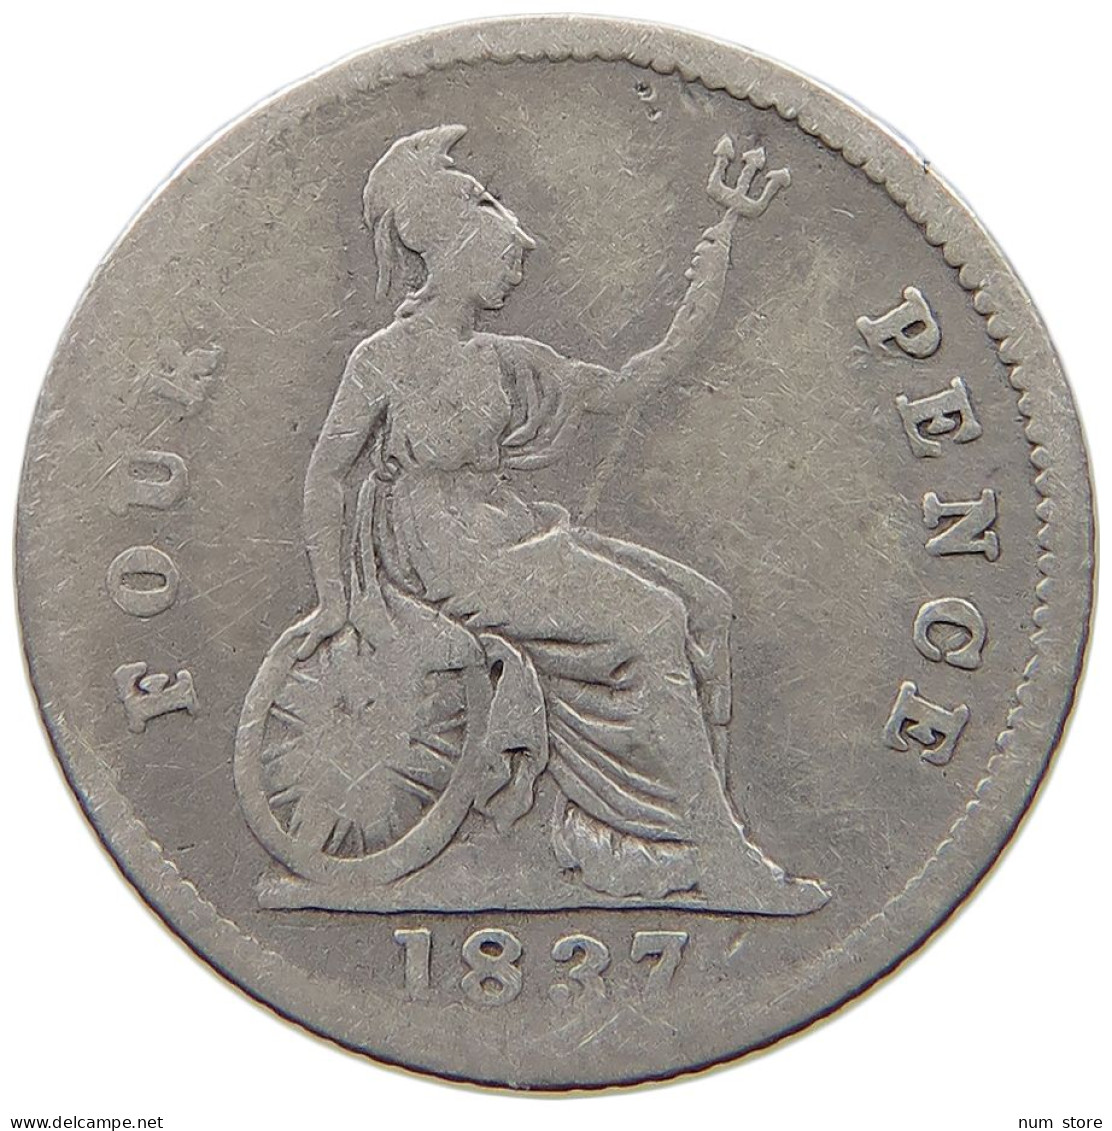 GREAT BRITAIN FOURPENCE 1837 WILLIAM IV. (1830-1837) #a091 0875 - G. 4 Pence/ Groat